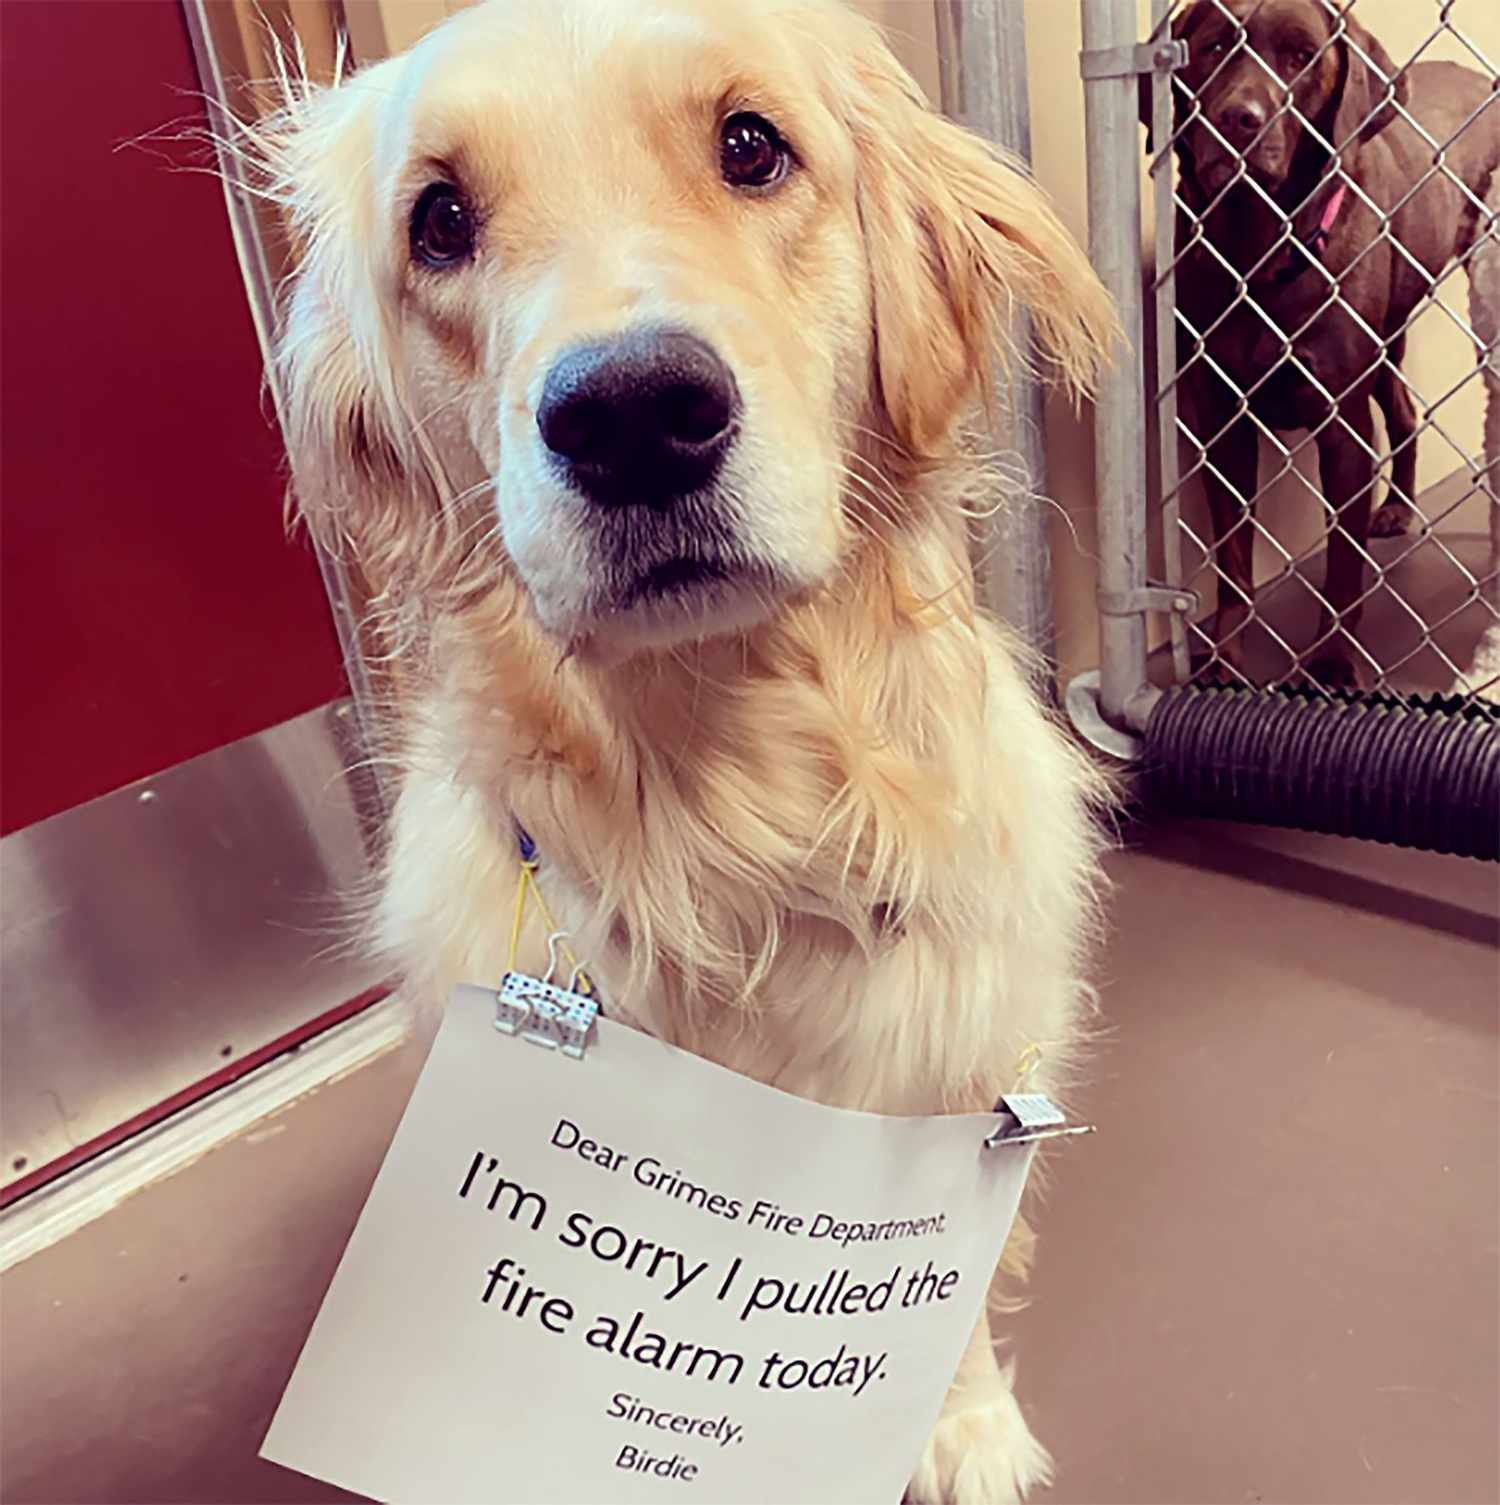 dog that pulled a fire alarm poses with a sign attached that apologizes for the fire department